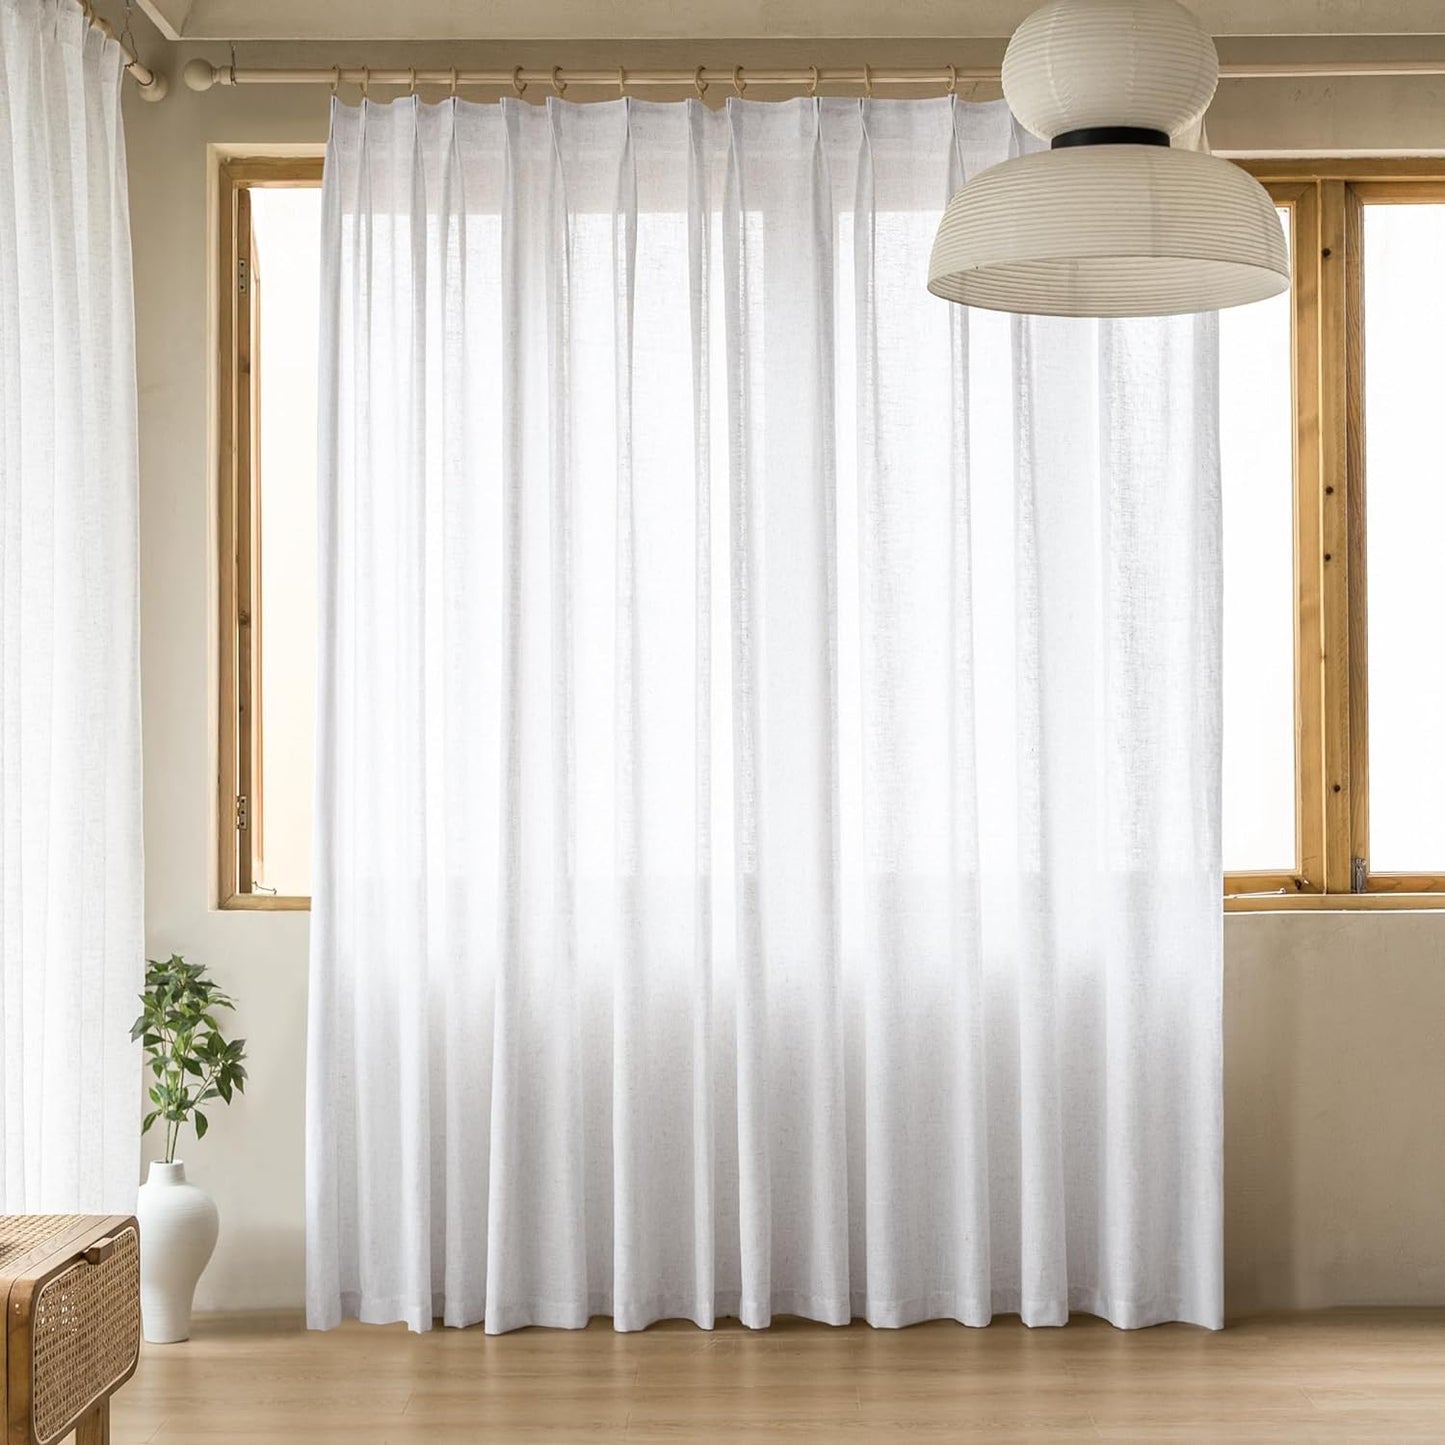 MAIHER Extra Wide Pinch Pleated Drapes 108 Inches Long, Faux Linen Light Filtering Semi Sheer Curtains with Hooks for Living Room Bedroom, Natural Linen (1 Panel, 100 W X 108 L)  MAIHER Beige White 54X84 